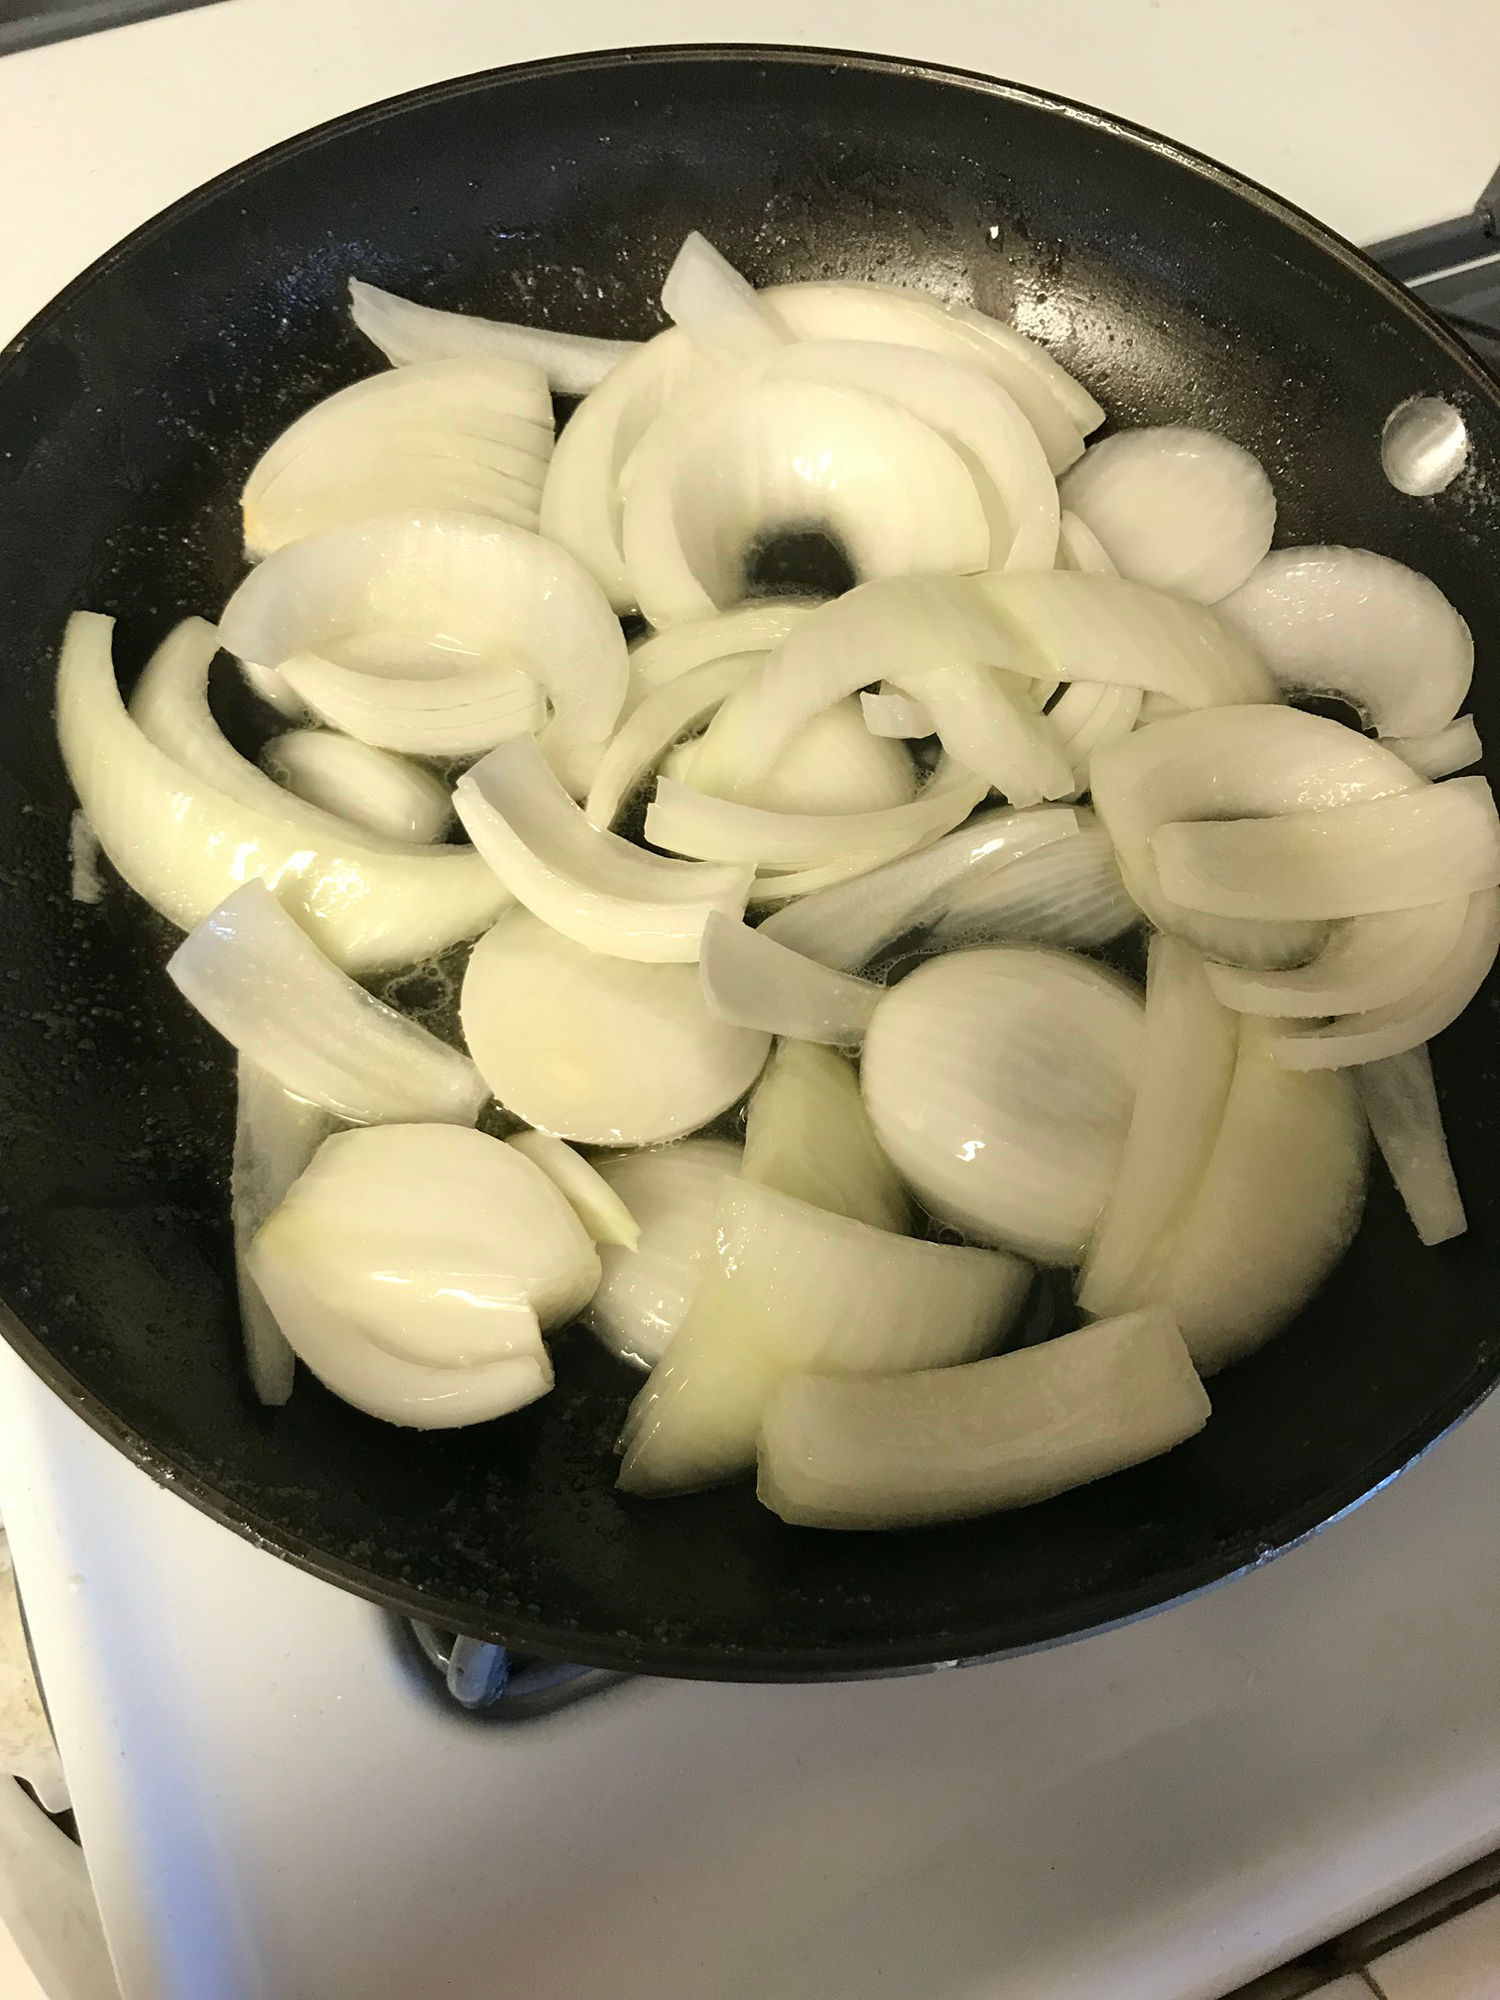 Onions Grilled